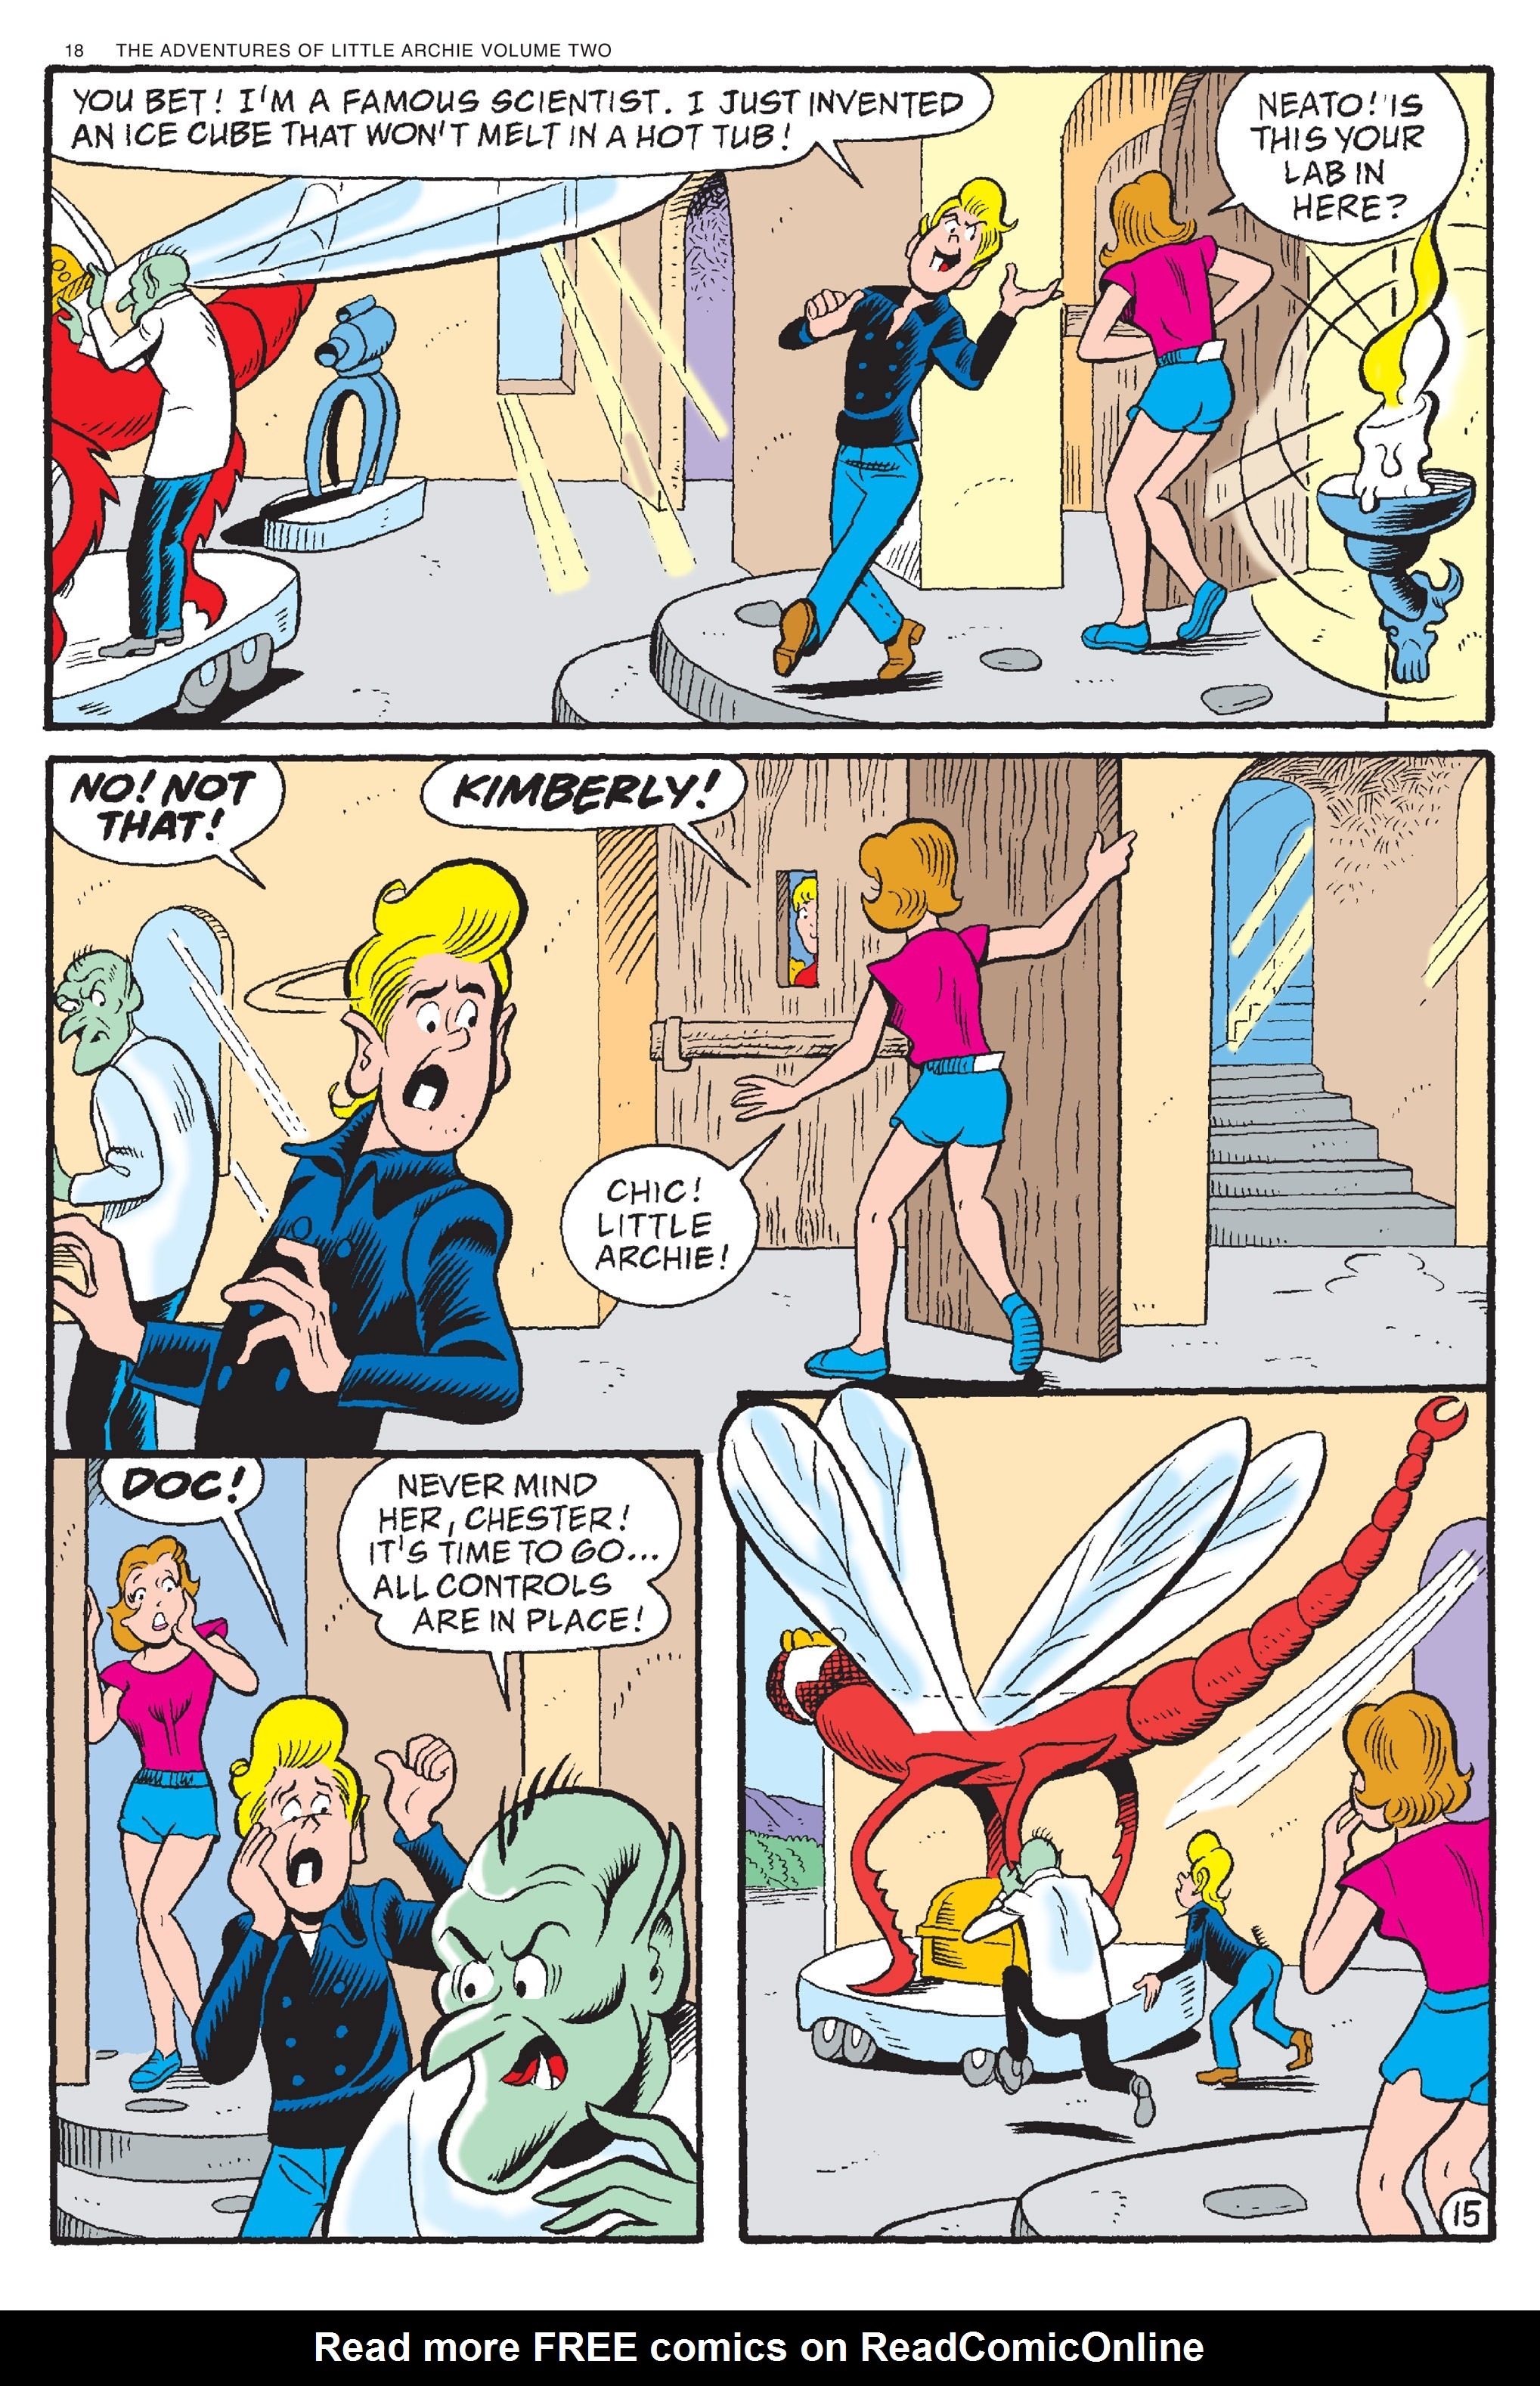 Read online Adventures of Little Archie comic -  Issue # TPB 2 - 19